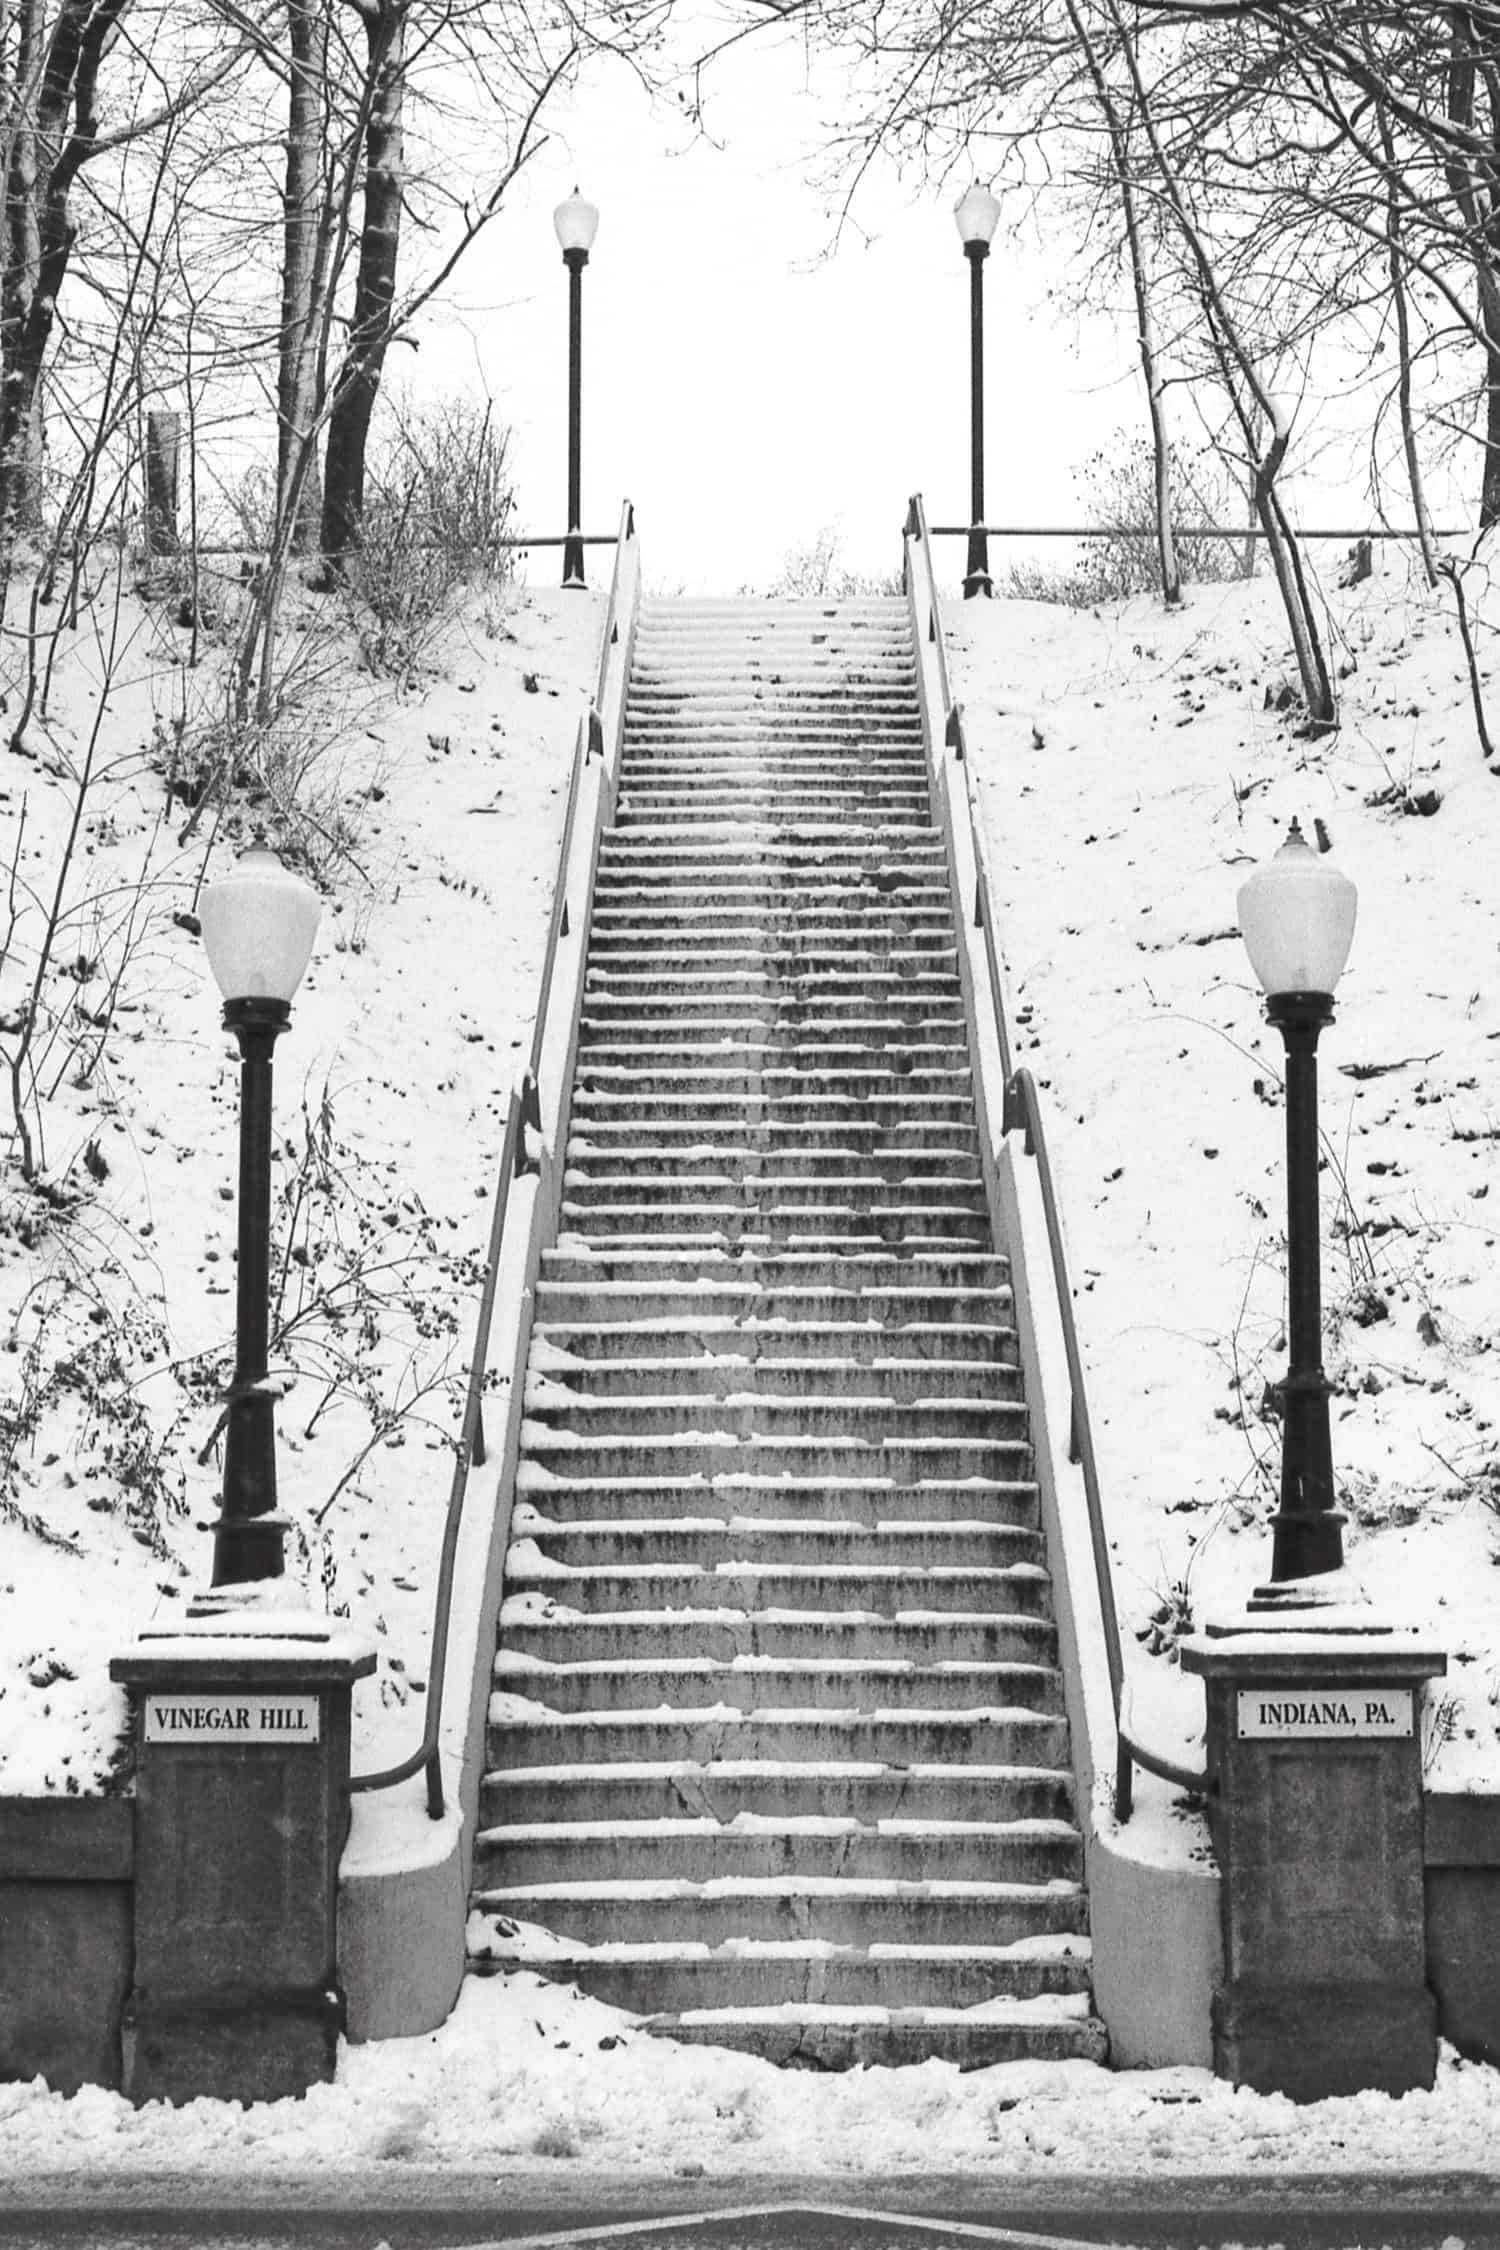 The Vinegar Hill stairs located in downtown Indiana, PA, lead to the boyhood home of Jimmy Stewart, the famous Hollywood actor. This is a local landmark.